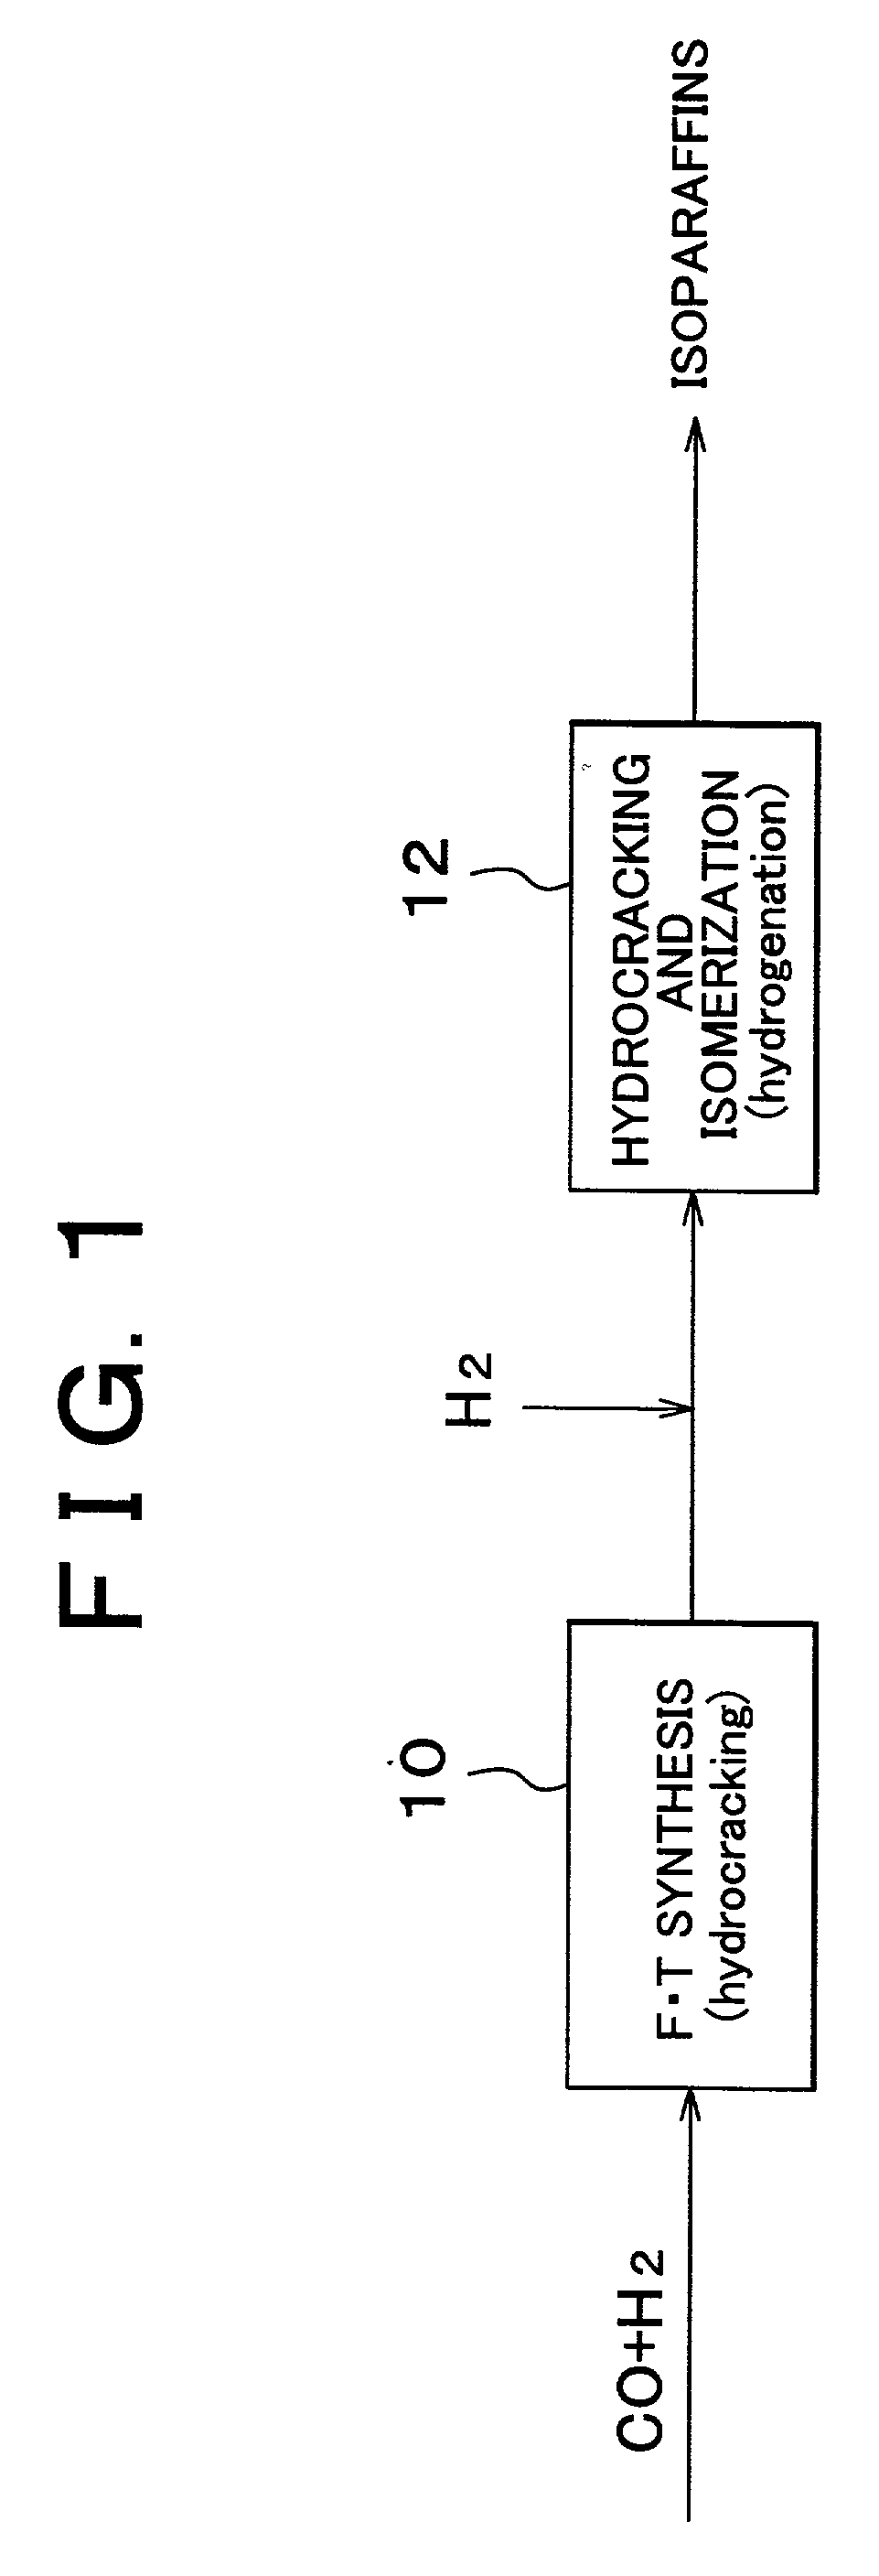 Process for synthesis of lower isoparaffins from synthesis gas